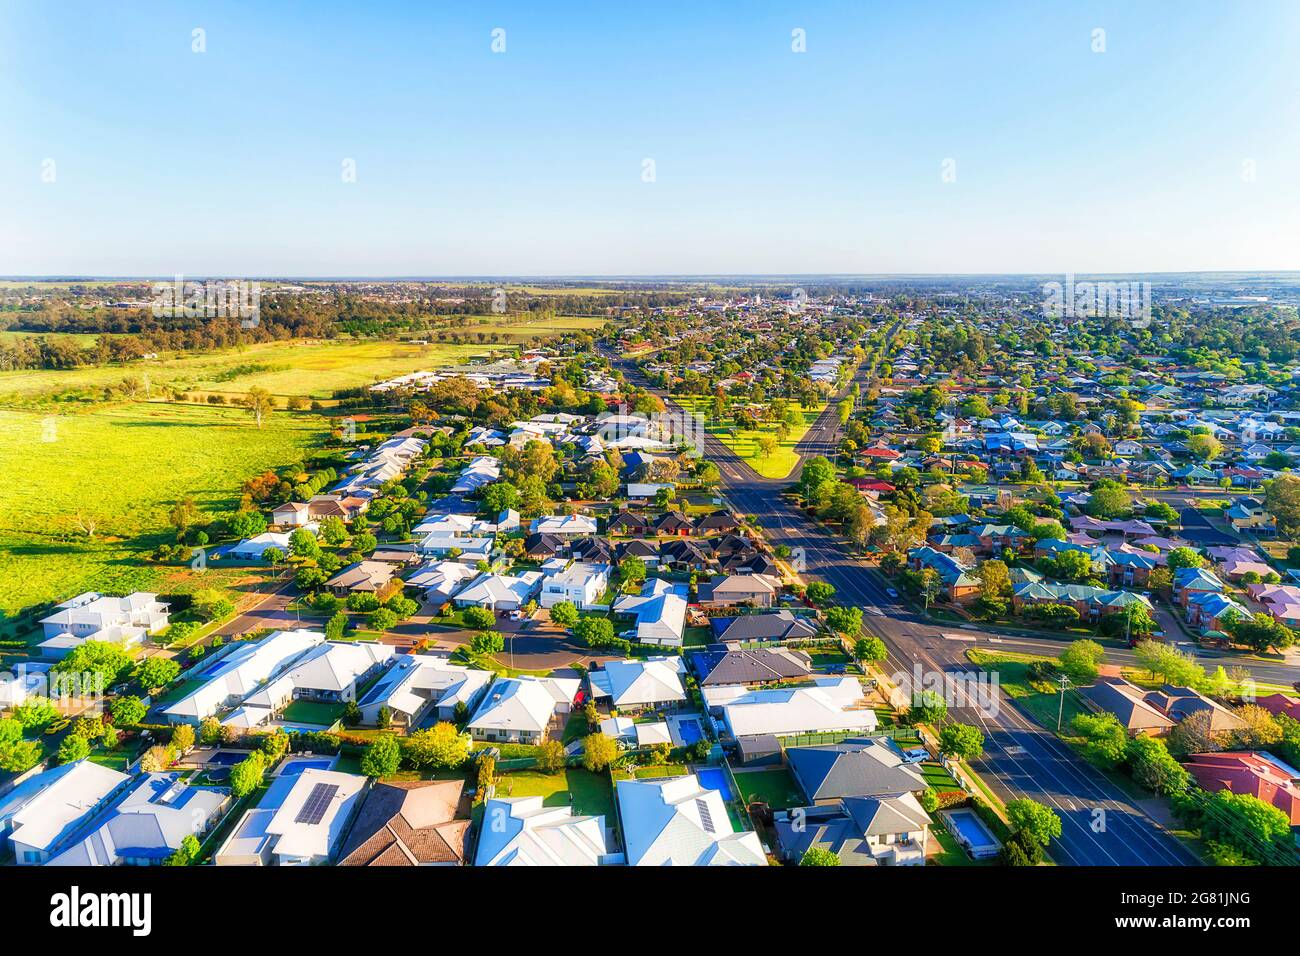 Great western plains of Australia - Dubbo town streets and residential suburbs in aerial scenic view. Stock Photo